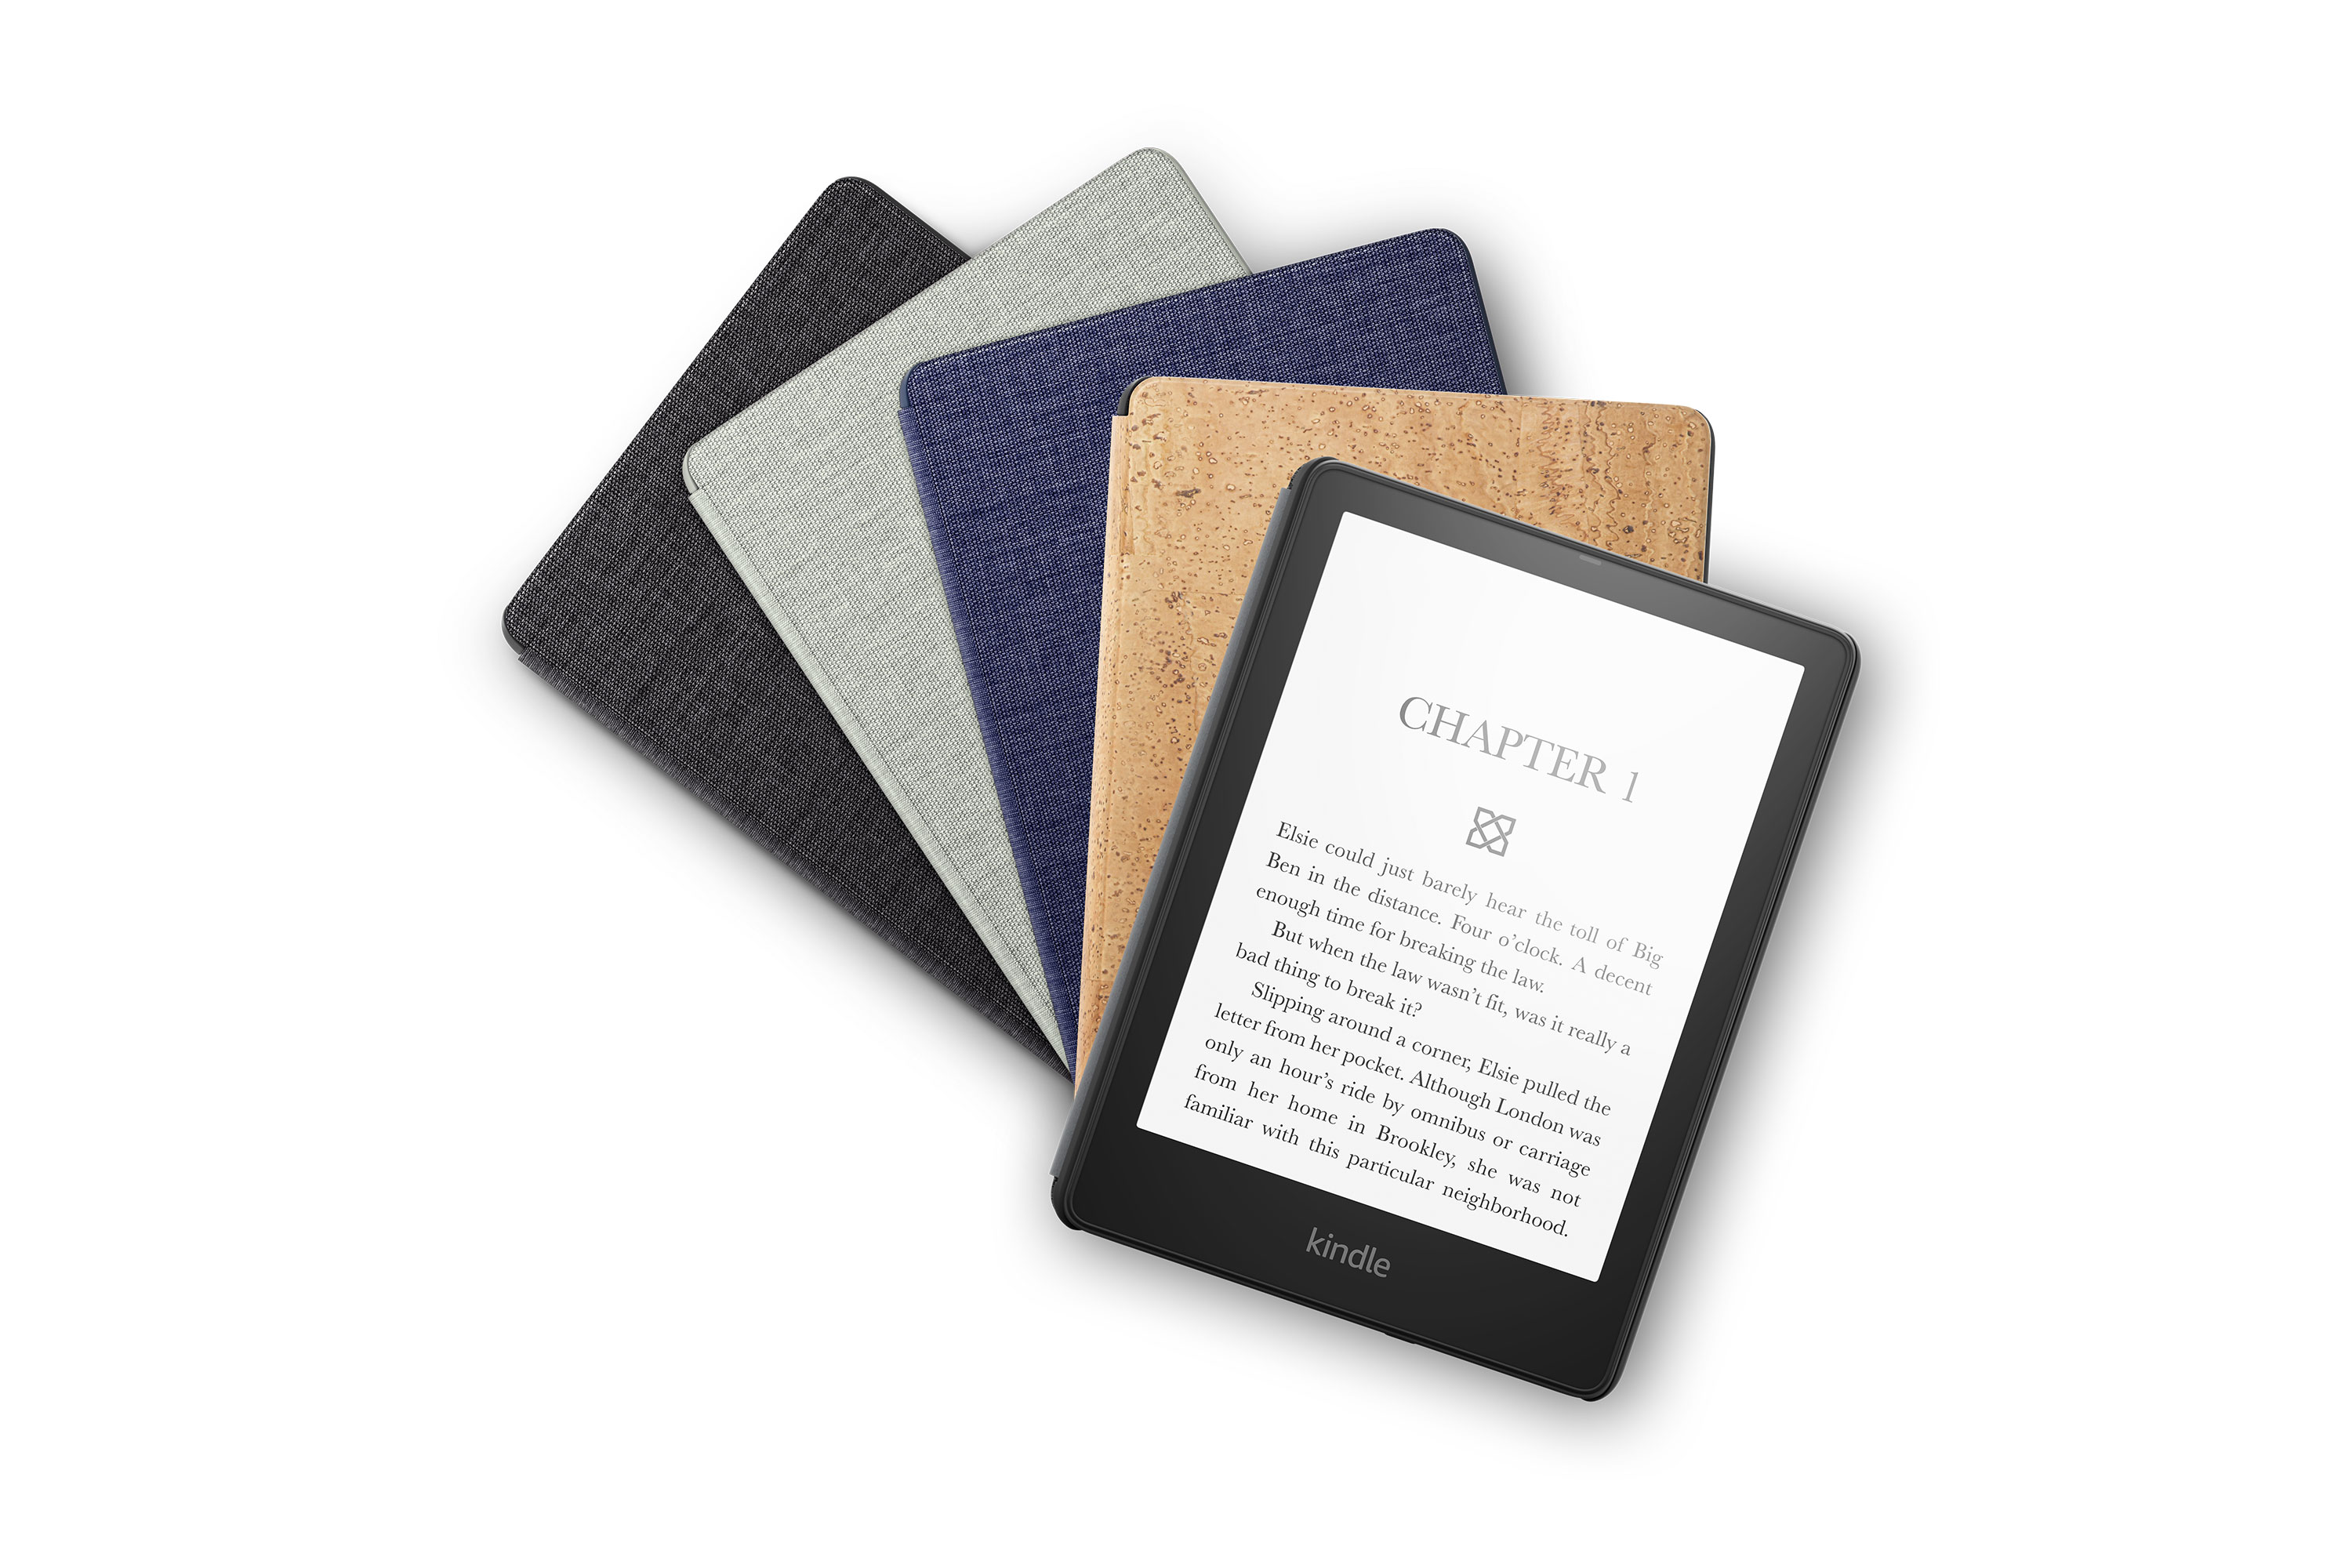 Kindle Paperwhite with its optional cases.